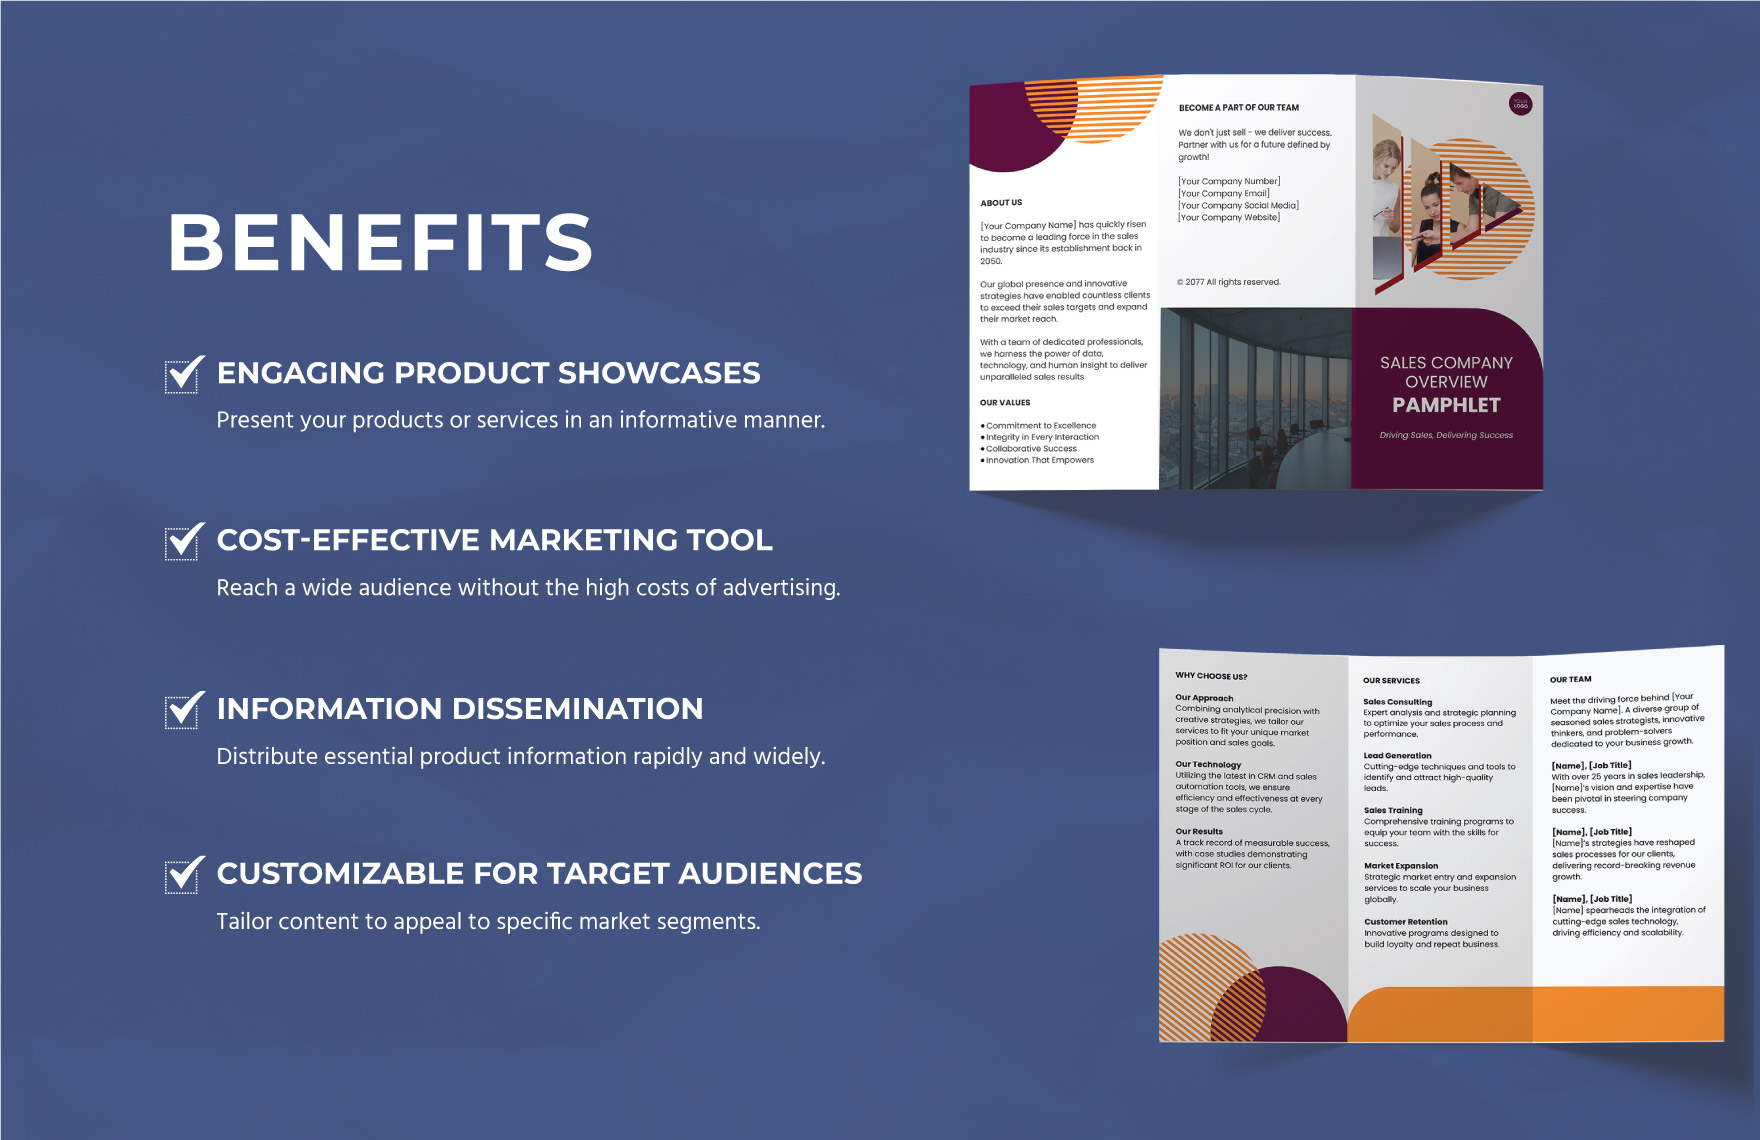 Sales Company Overview Pamphlet Template